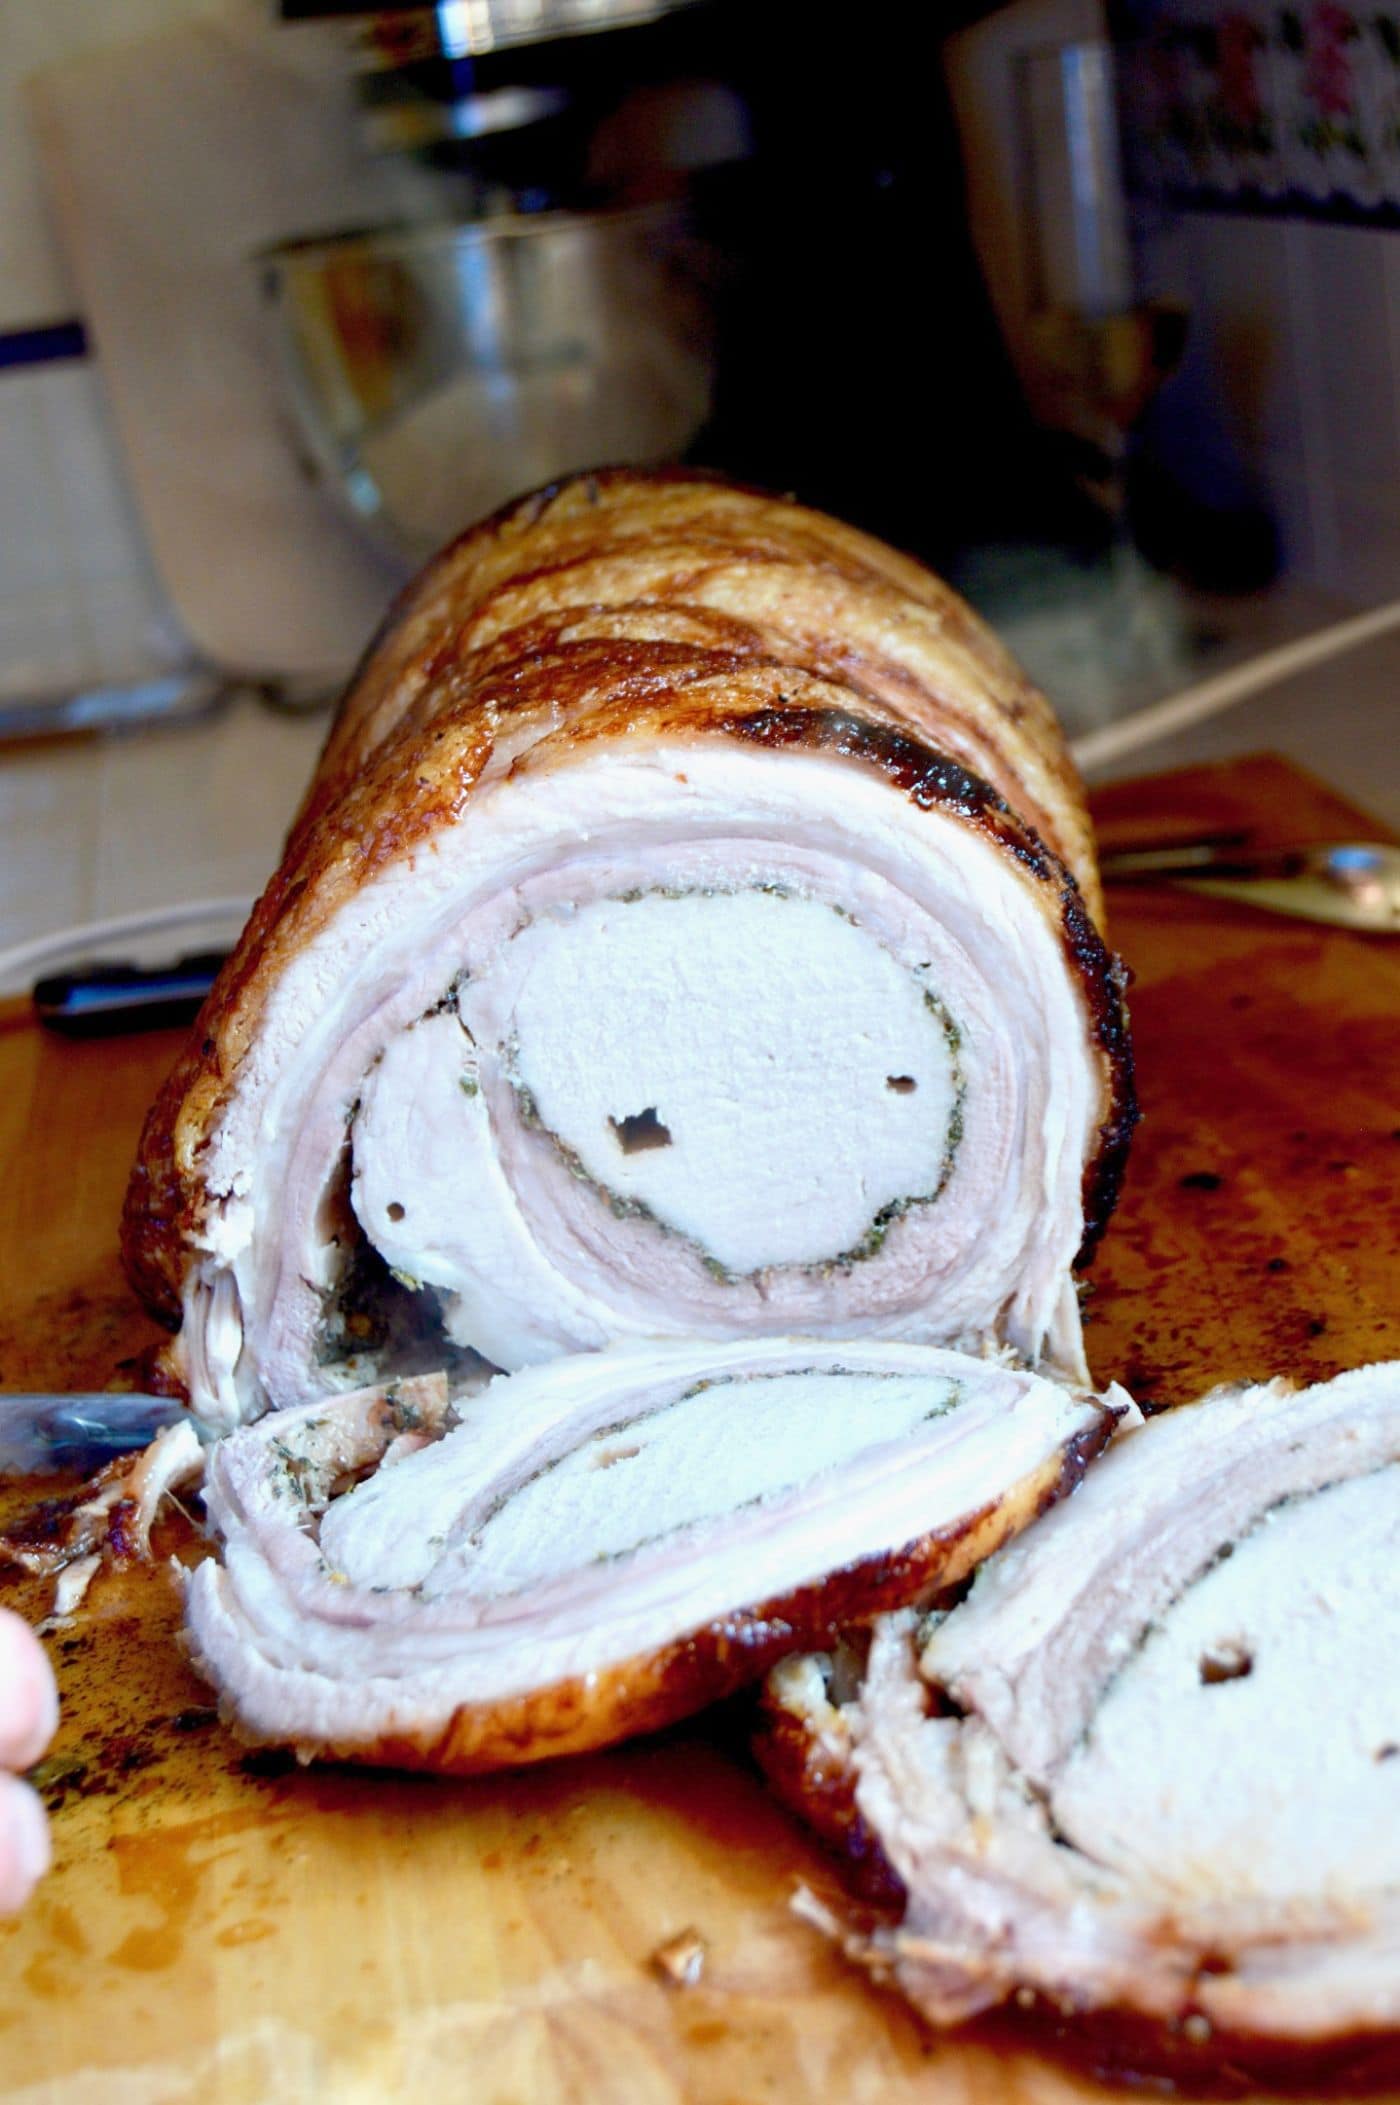 Slices of the pork belly roll---Porchetta, Crispy Pork Belly with herbs wrapped around a pork tenderloin and cooked to juicy, tender perfection.  A crazy impressive meal to your guests, but you'll know how simple it was to make!